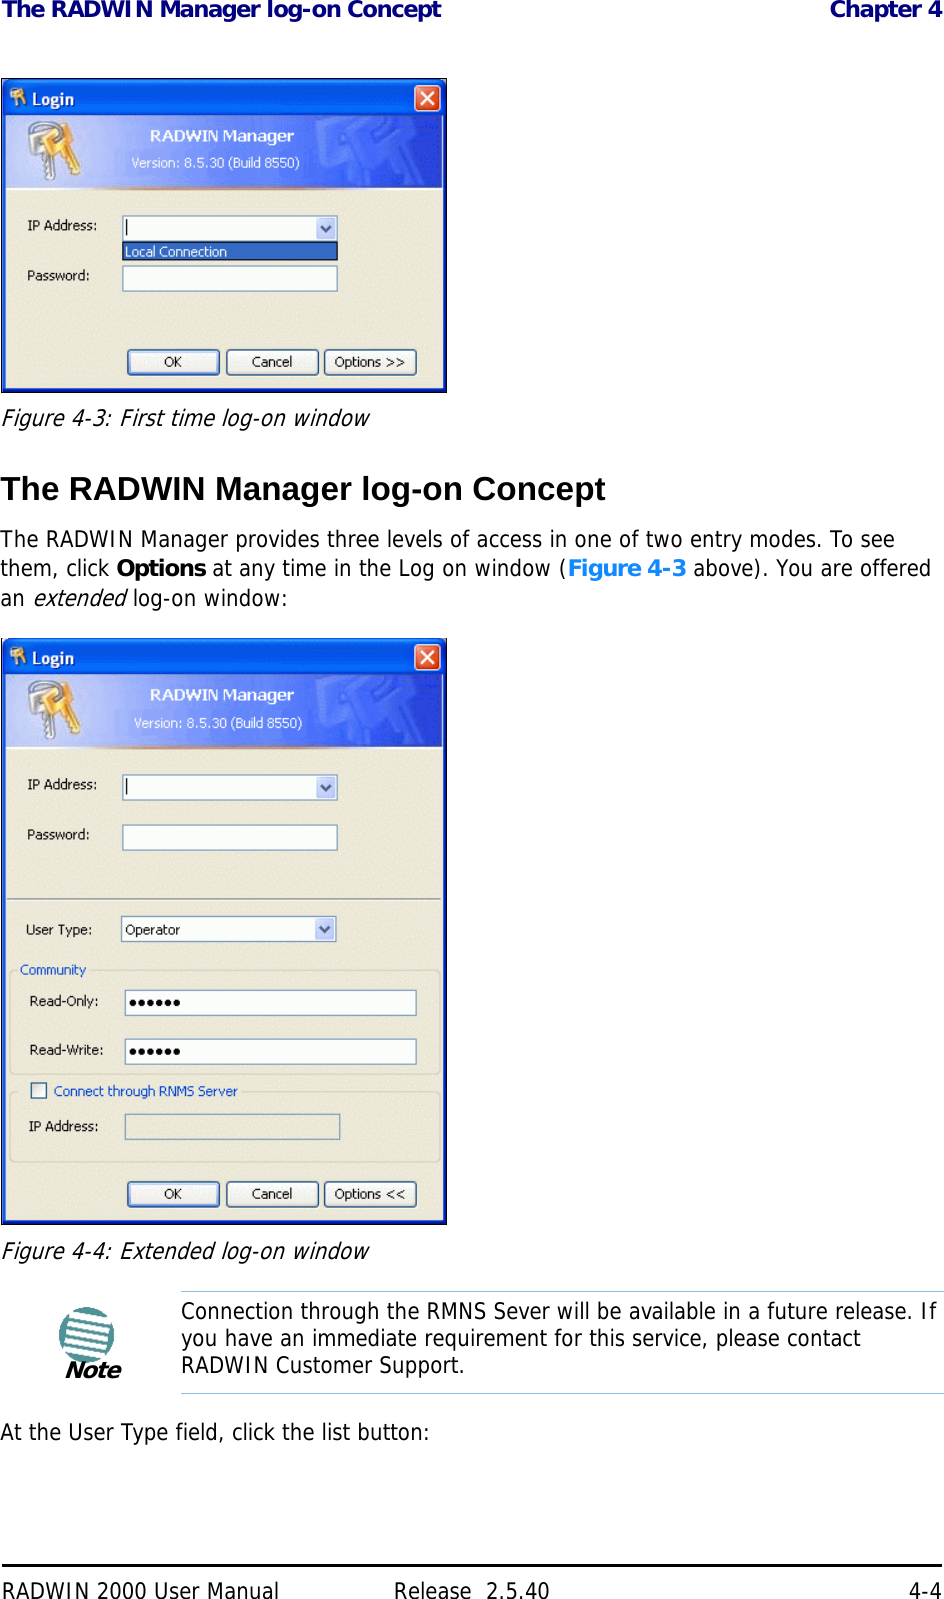 The RADWIN Manager log-on Concept Chapter 4RADWIN 2000 User Manual Release  2.5.40 4-4Figure 4-3: First time log-on windowThe RADWIN Manager log-on ConceptThe RADWIN Manager provides three levels of access in one of two entry modes. To see them, click Options at any time in the Log on window (Figure 4-3 above). You are offered an extended log-on window:Figure 4-4: Extended log-on windowAt the User Type field, click the list button:NoteConnection through the RMNS Sever will be available in a future release. If you have an immediate requirement for this service, please contact RADWIN Customer Support.